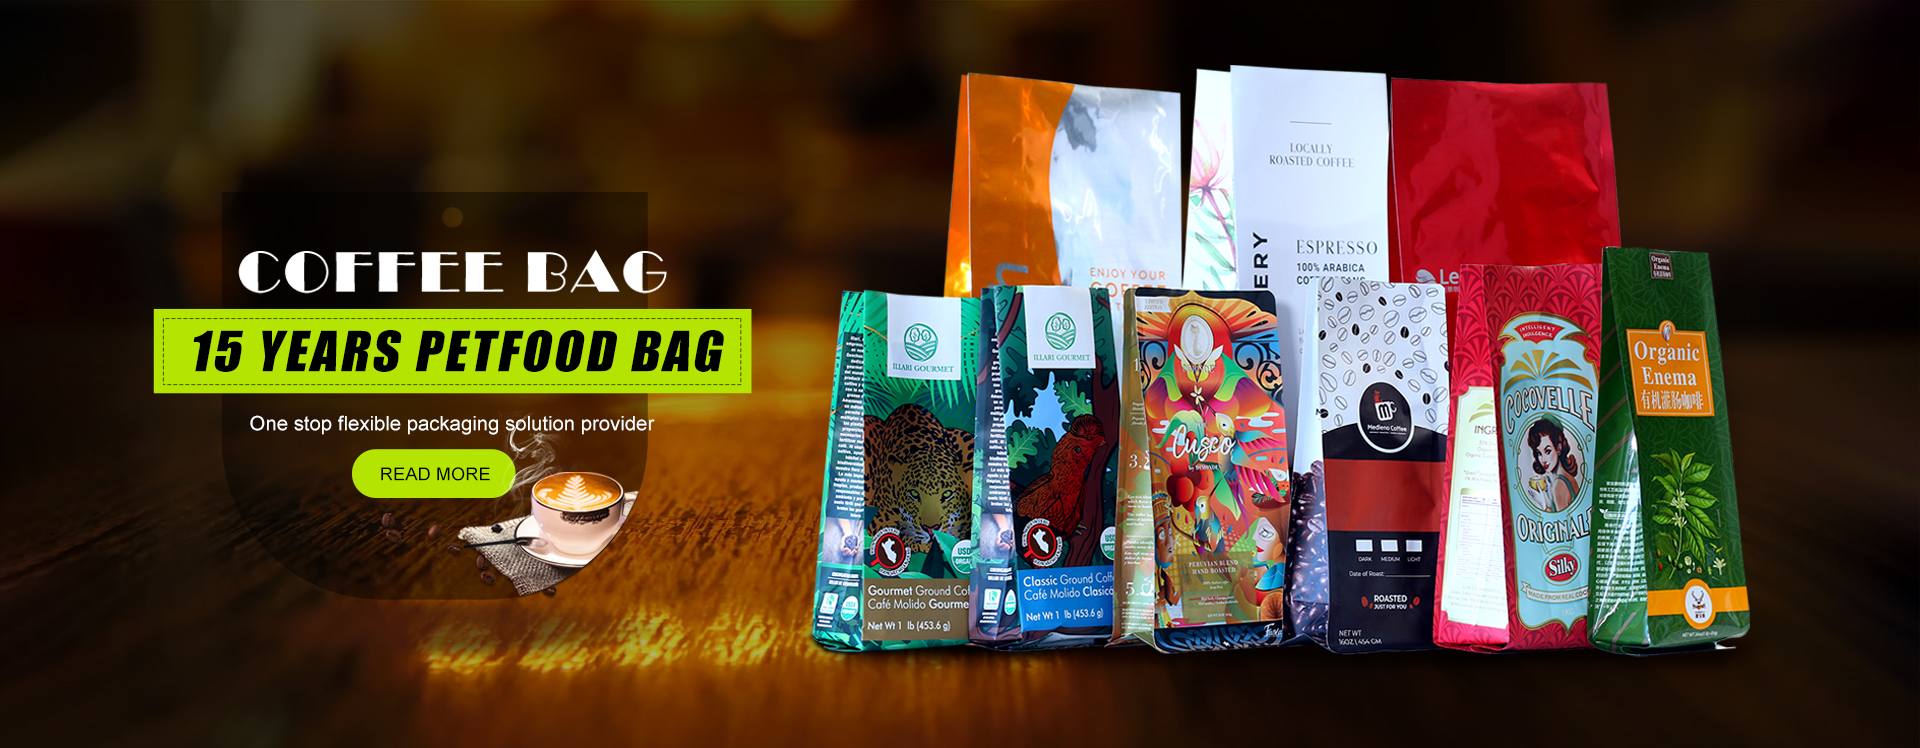 Minfly Packaging Coffee Bag Banner